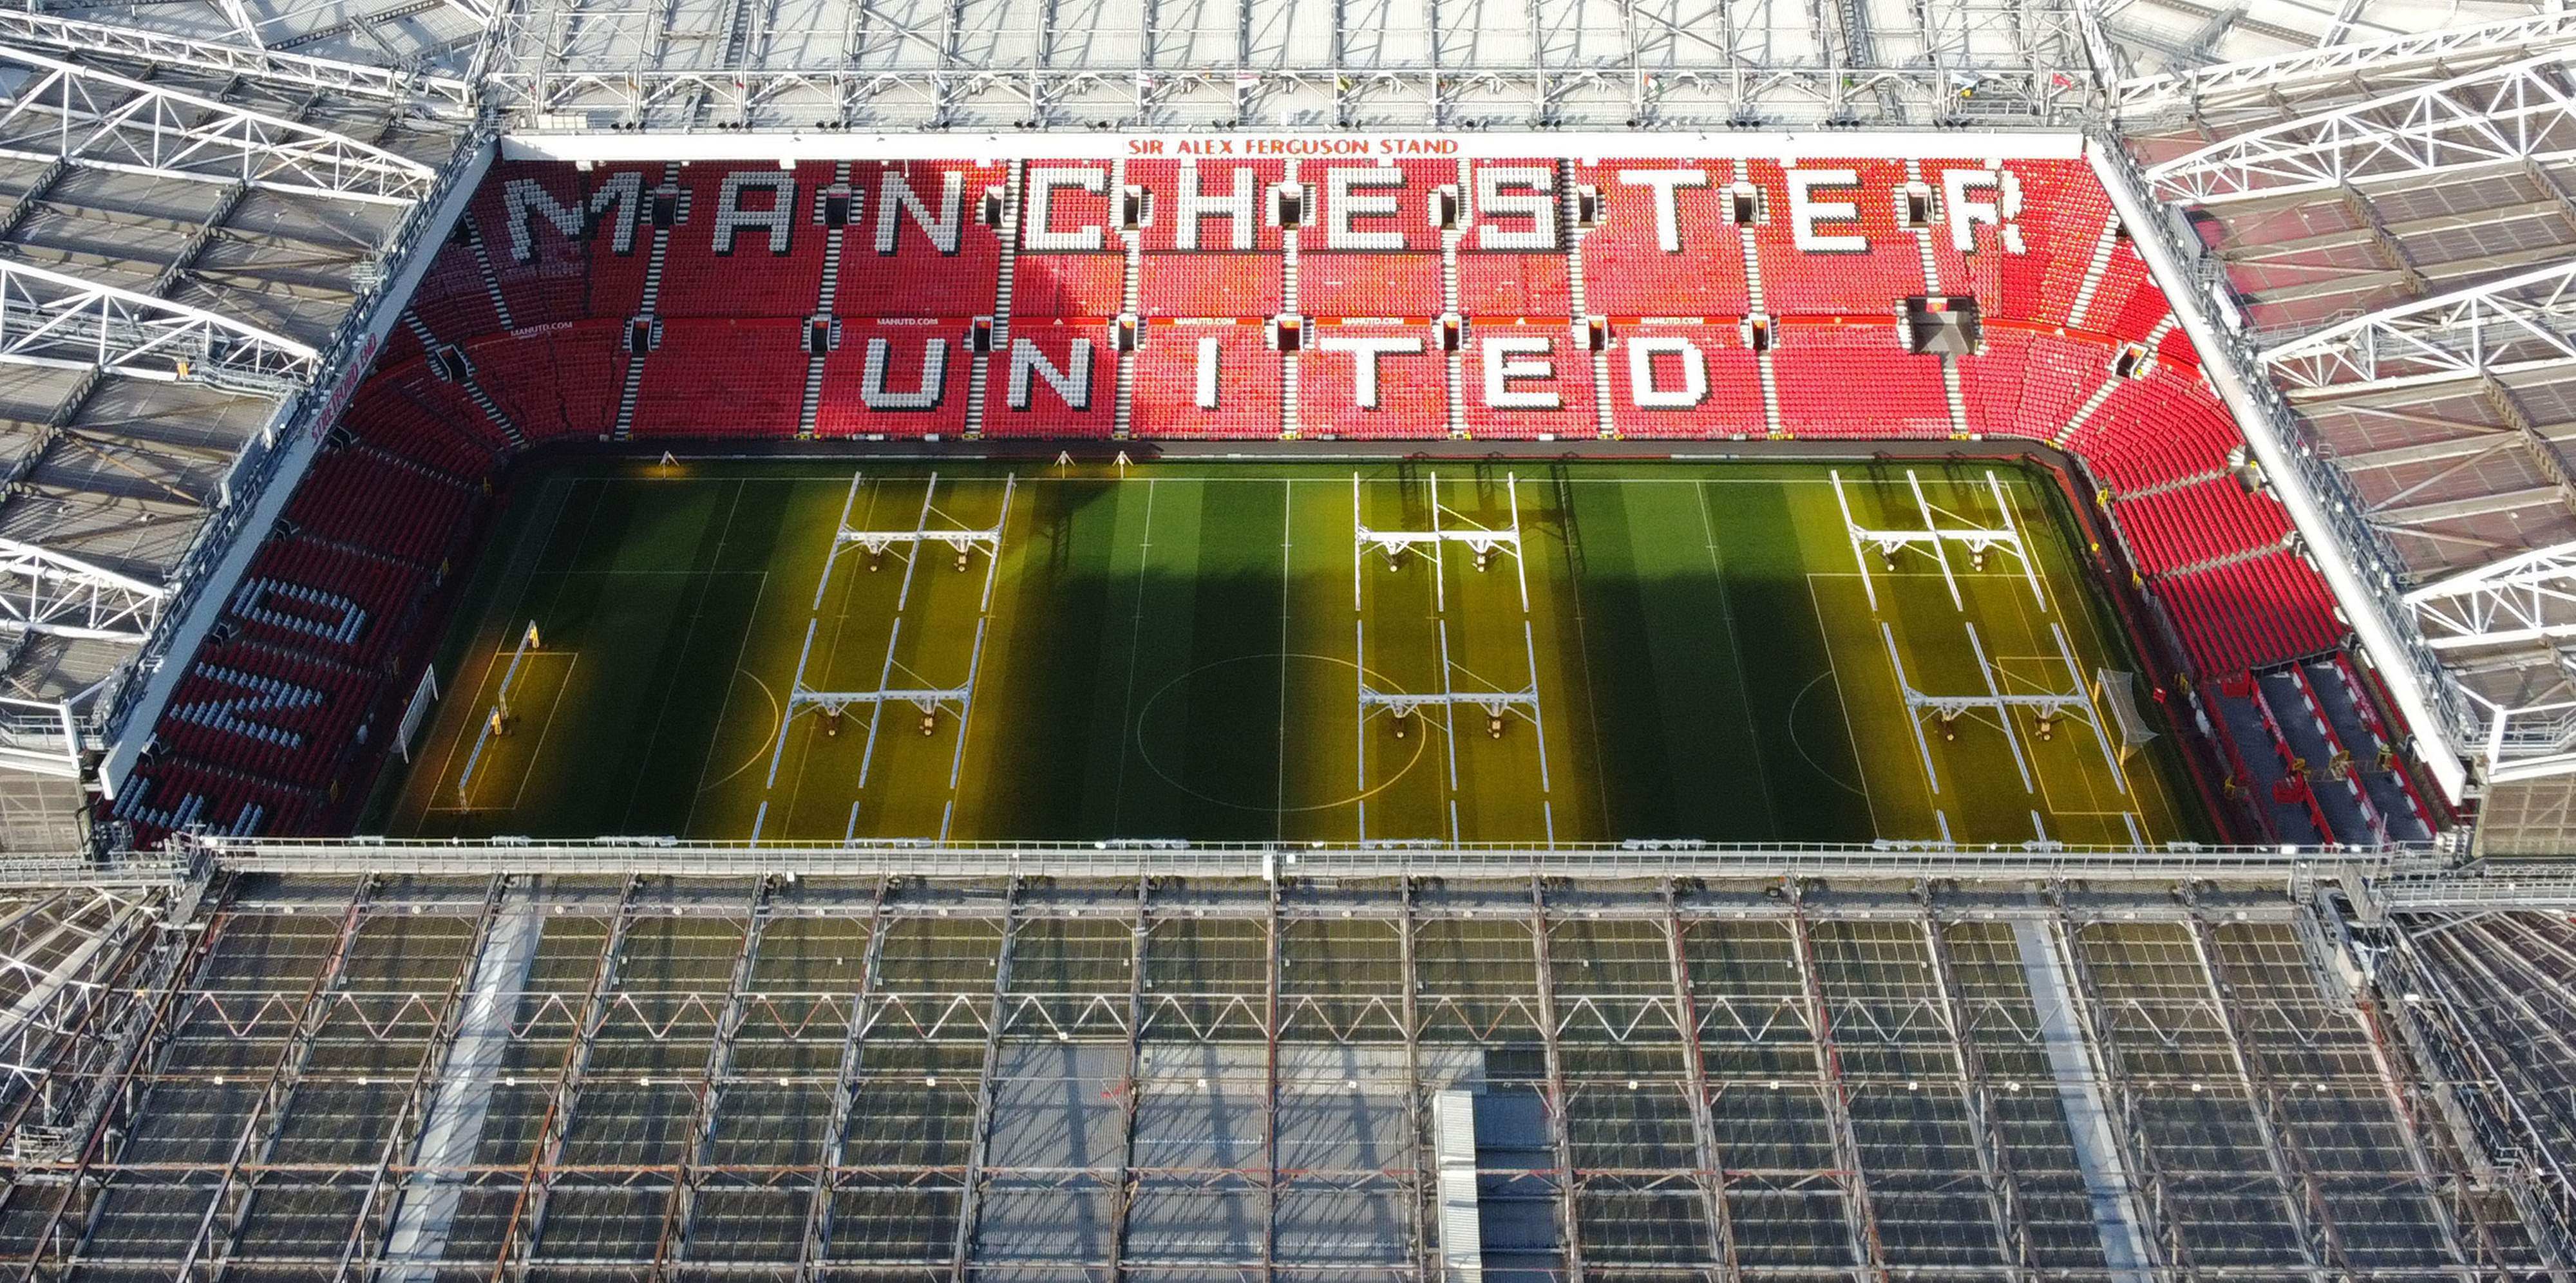 Manchester United’s stadium, Old Trafford. Photo: AFP